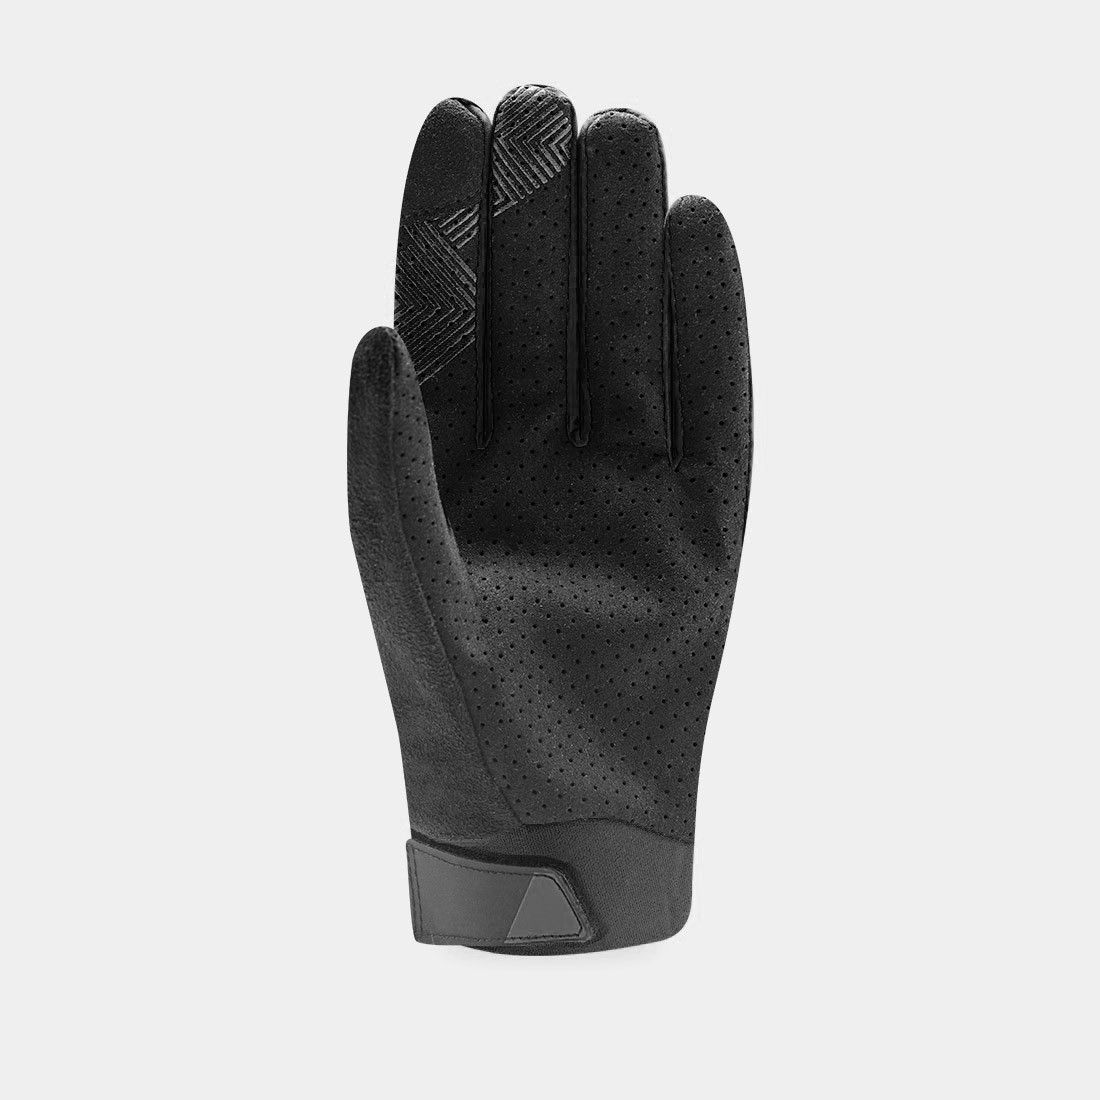 GP STYLE 2 - SUMMER CYCLING GLOVES - RACER